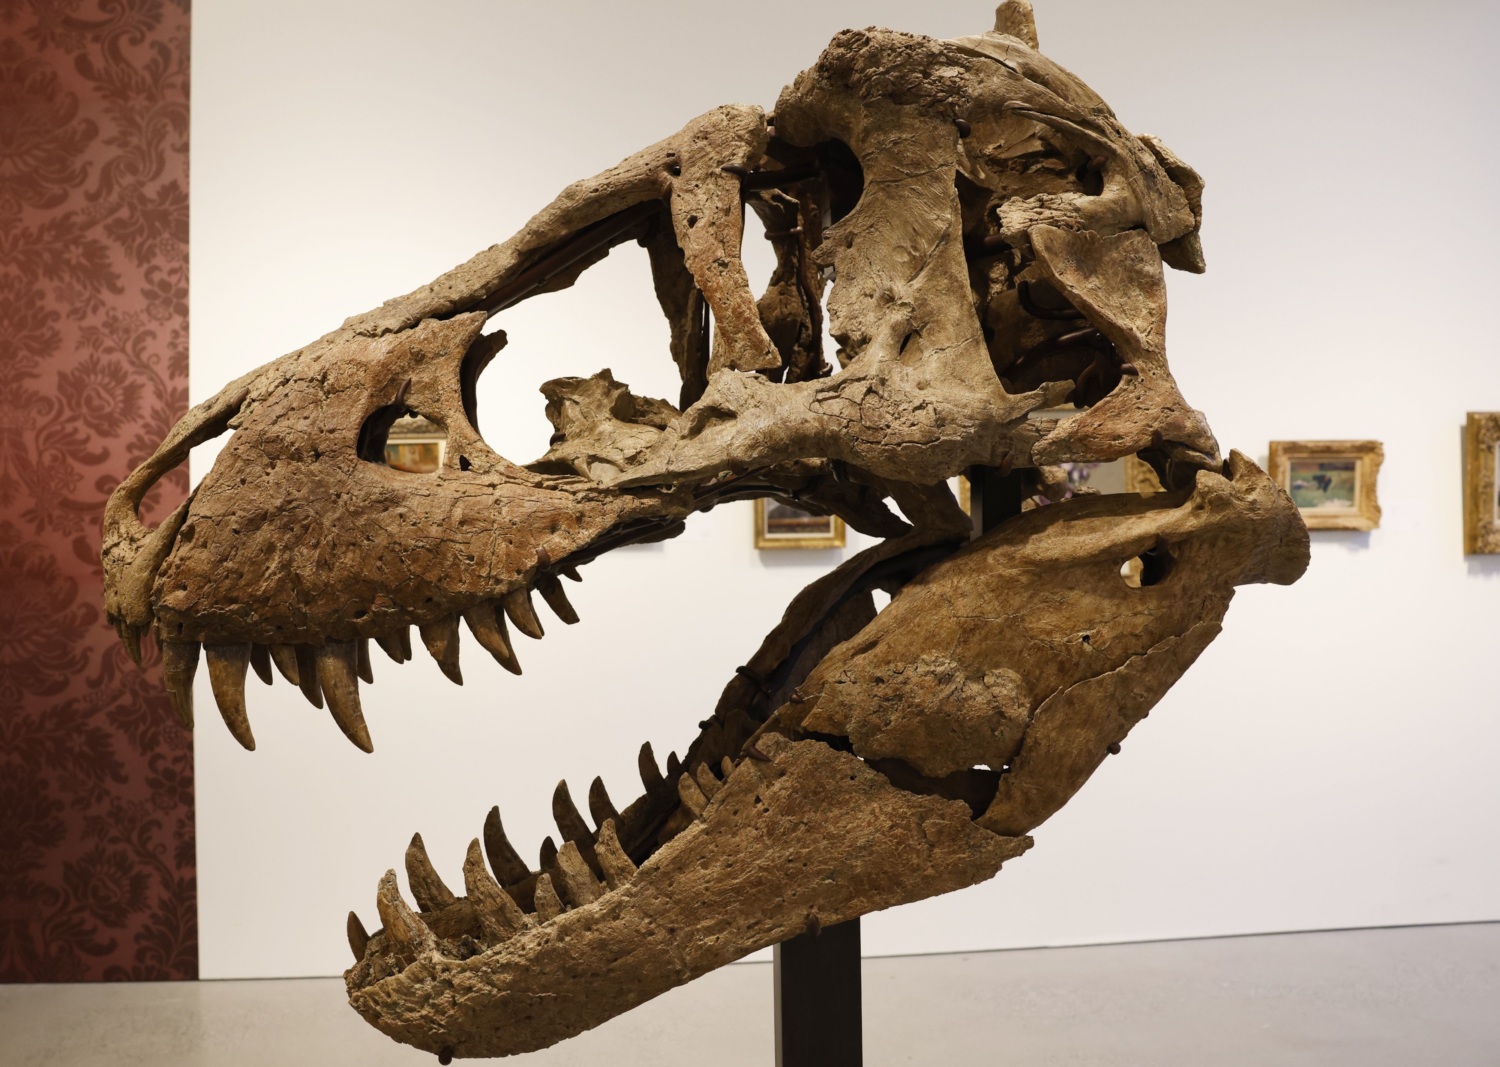 T Rex Skull Excavated in South Dakota Expected to Fetch $15 Million in New York Auction